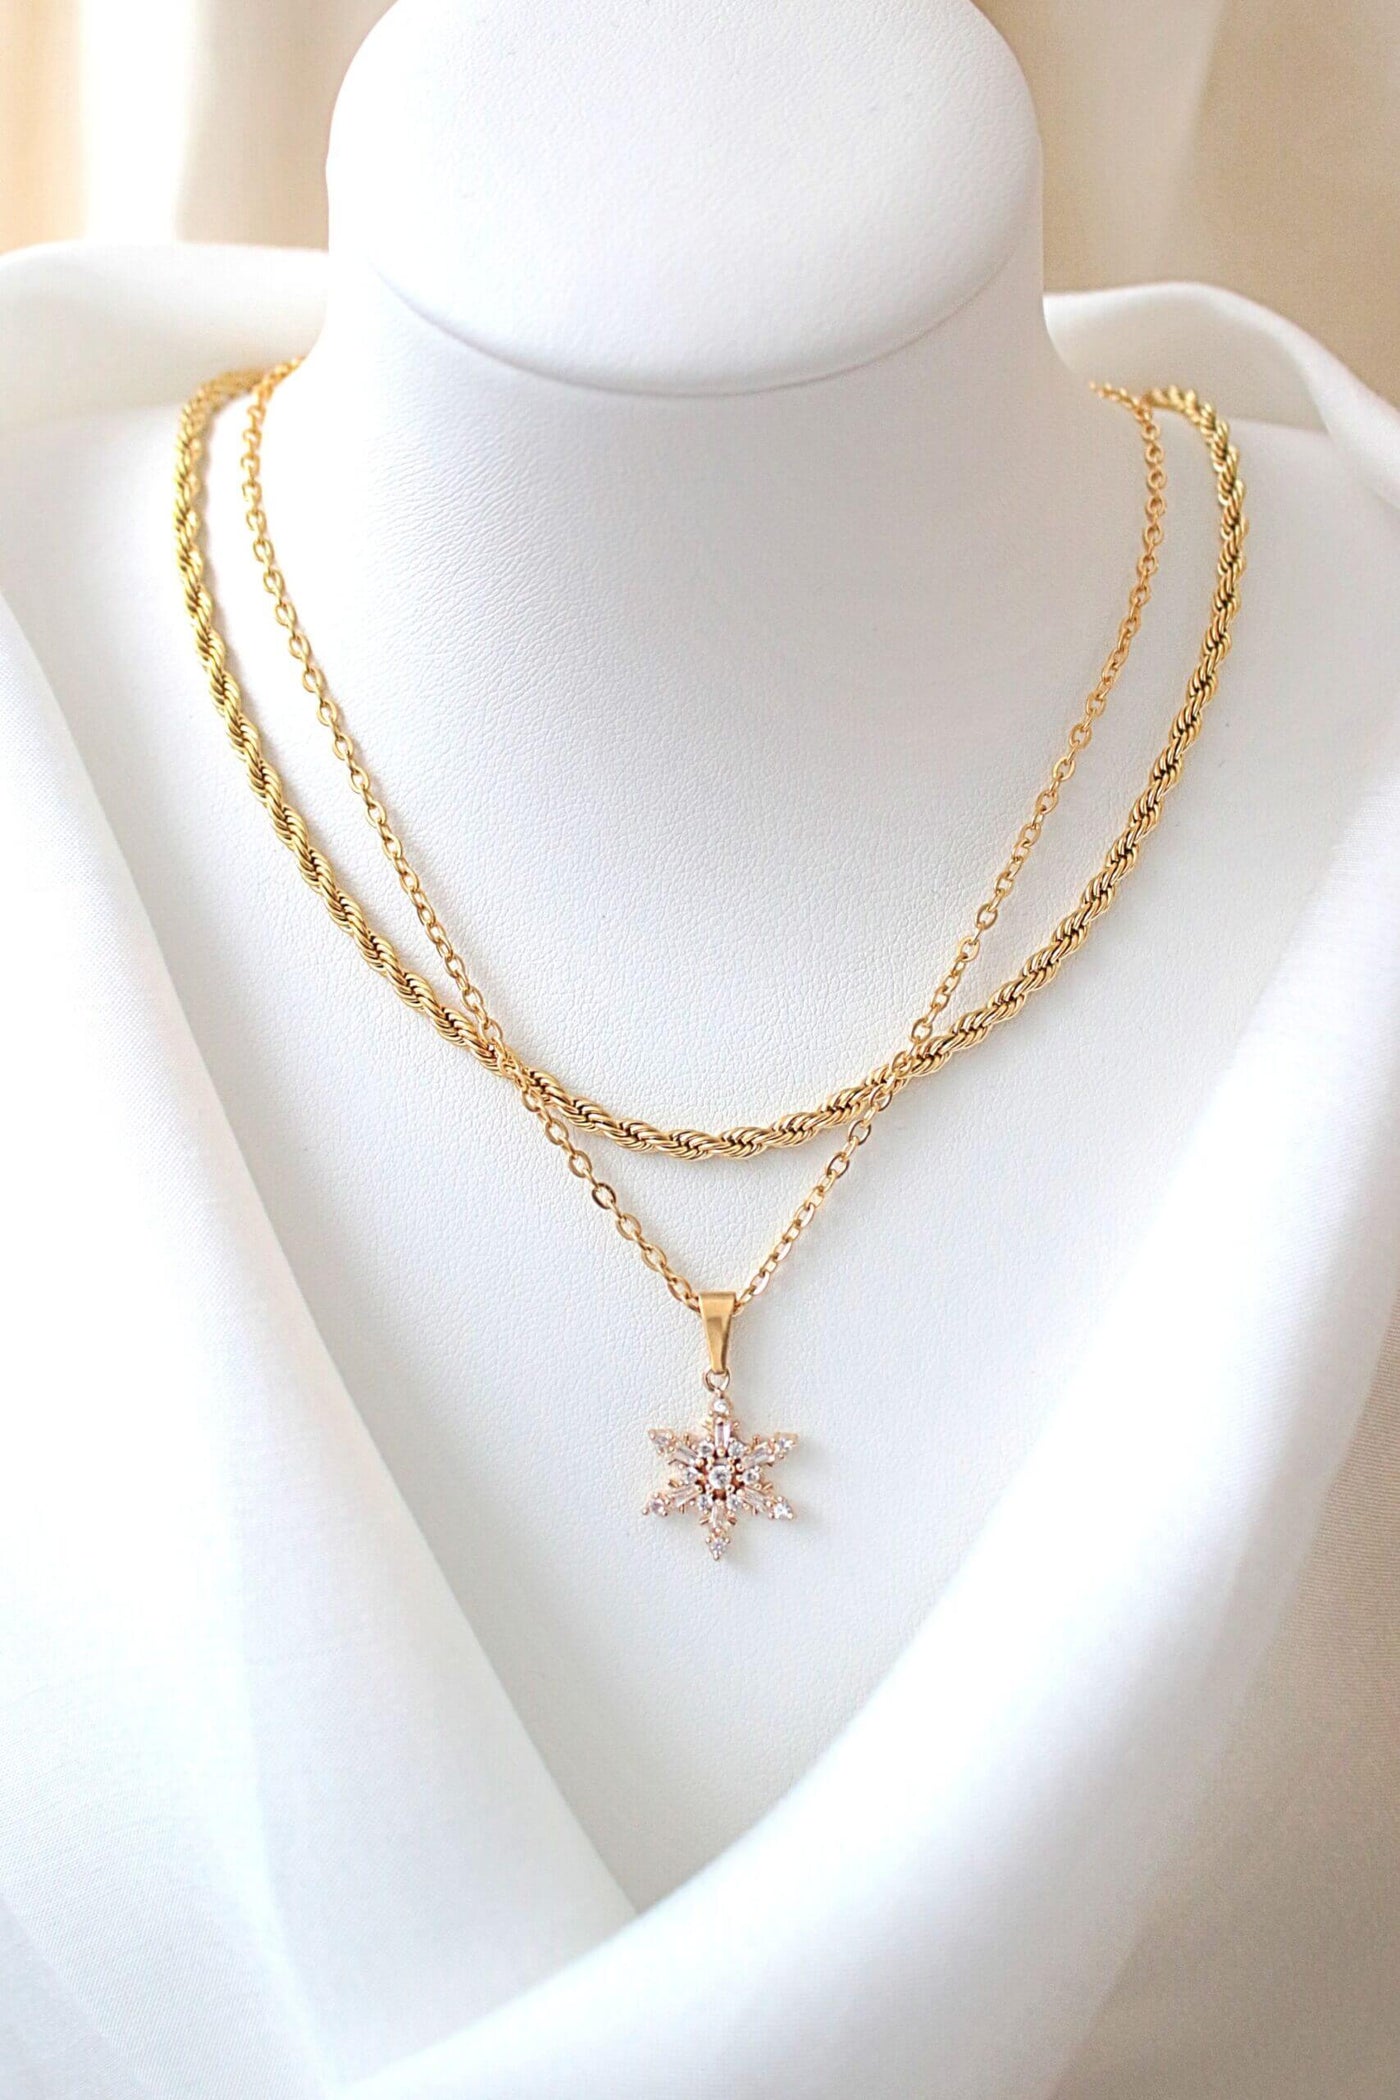 Necklace - Snowflake - 24k gold plated.